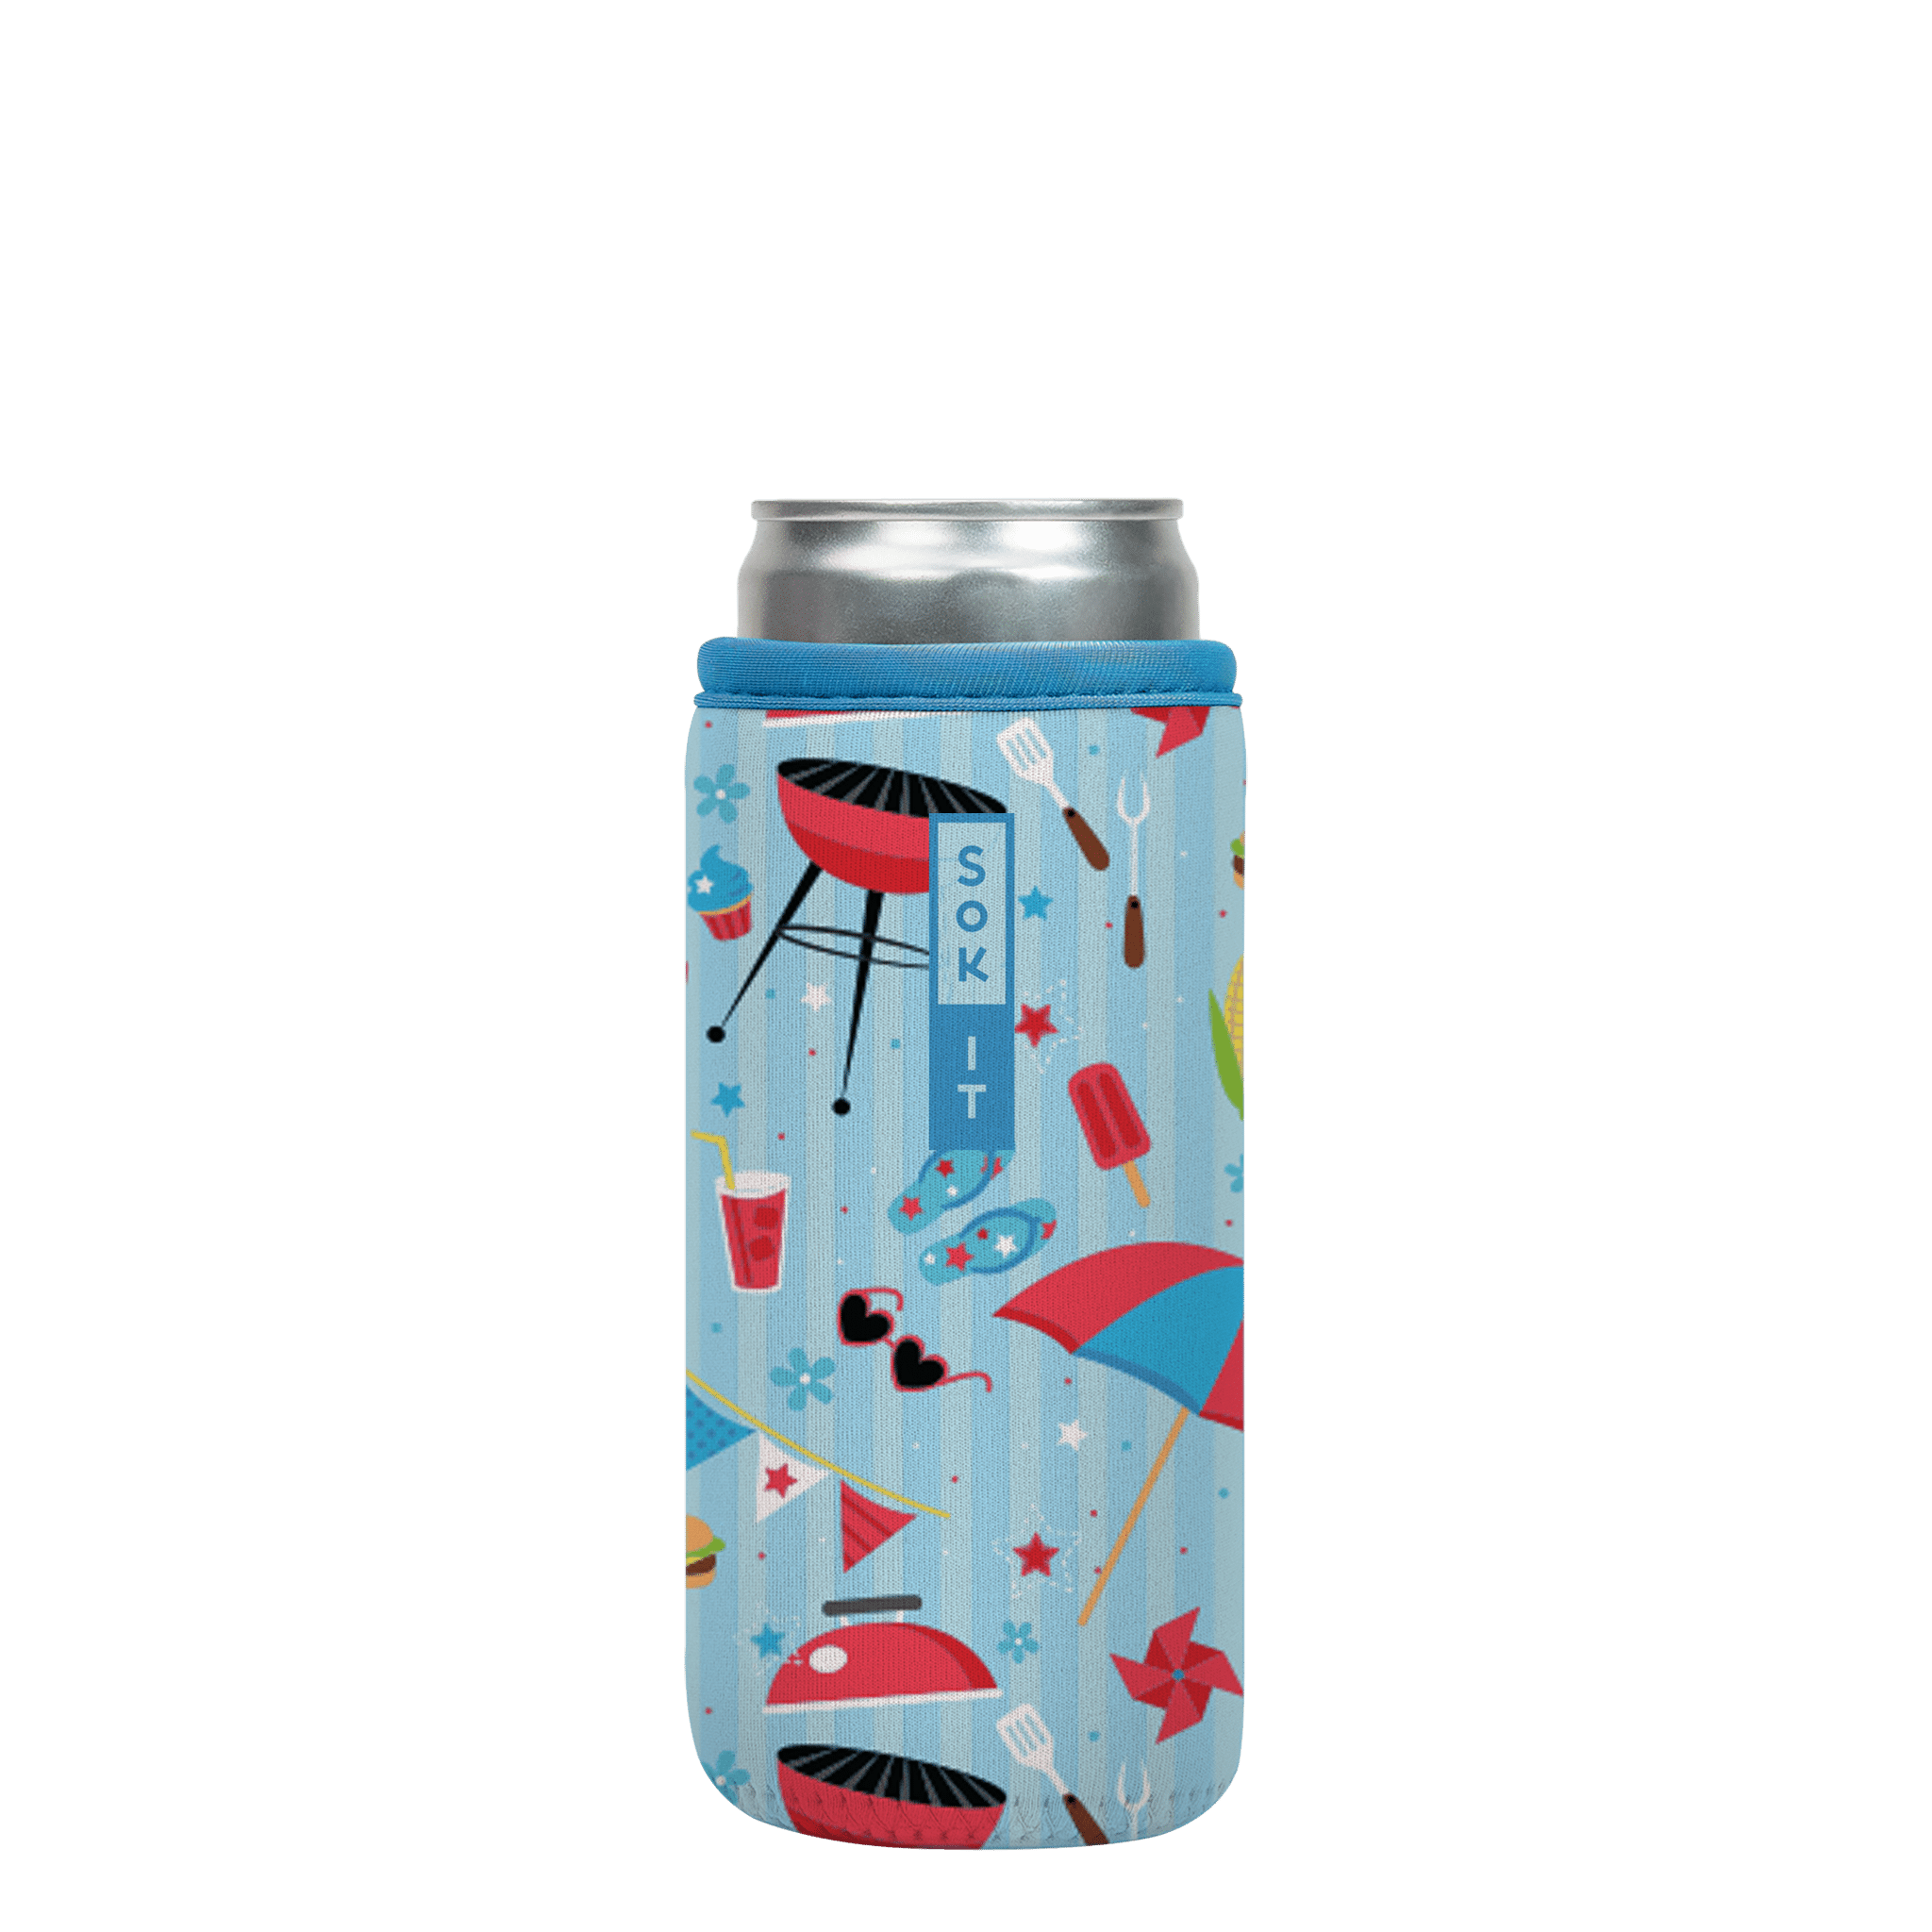 CanSok-Summertime 12oz Slim Can 